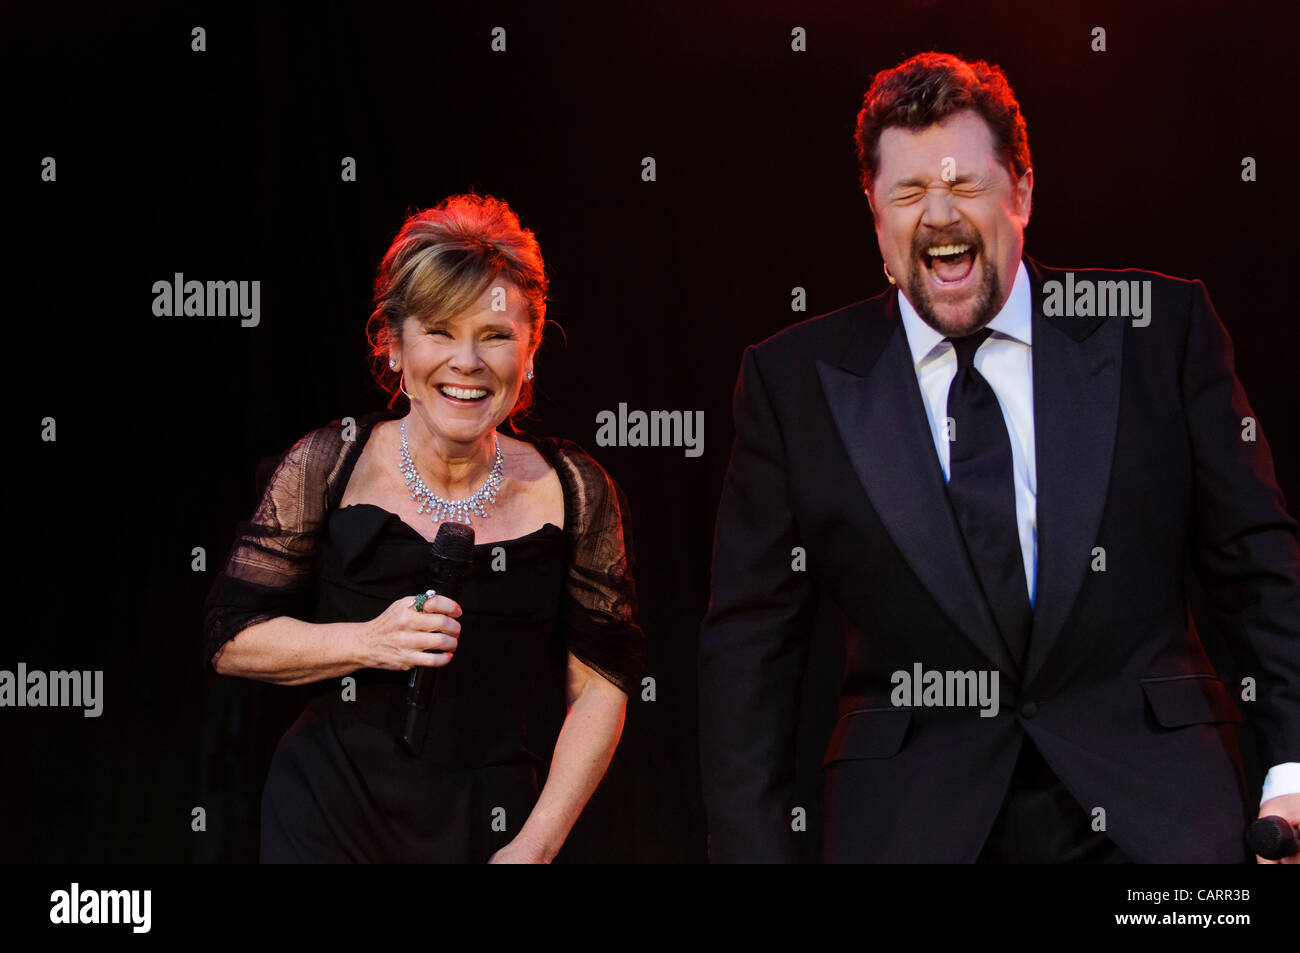 LONDON, Covent Garden, 15 April 2012.  At the Olivier Awards 2012, (left) Imelda Staunton (actress) and (right) Michael Ball (singer and actor) prepare to introduce the announcers of the BBC Radio 2 Olivier Audience Award. Photograph : Stephen Chung Stock Photo